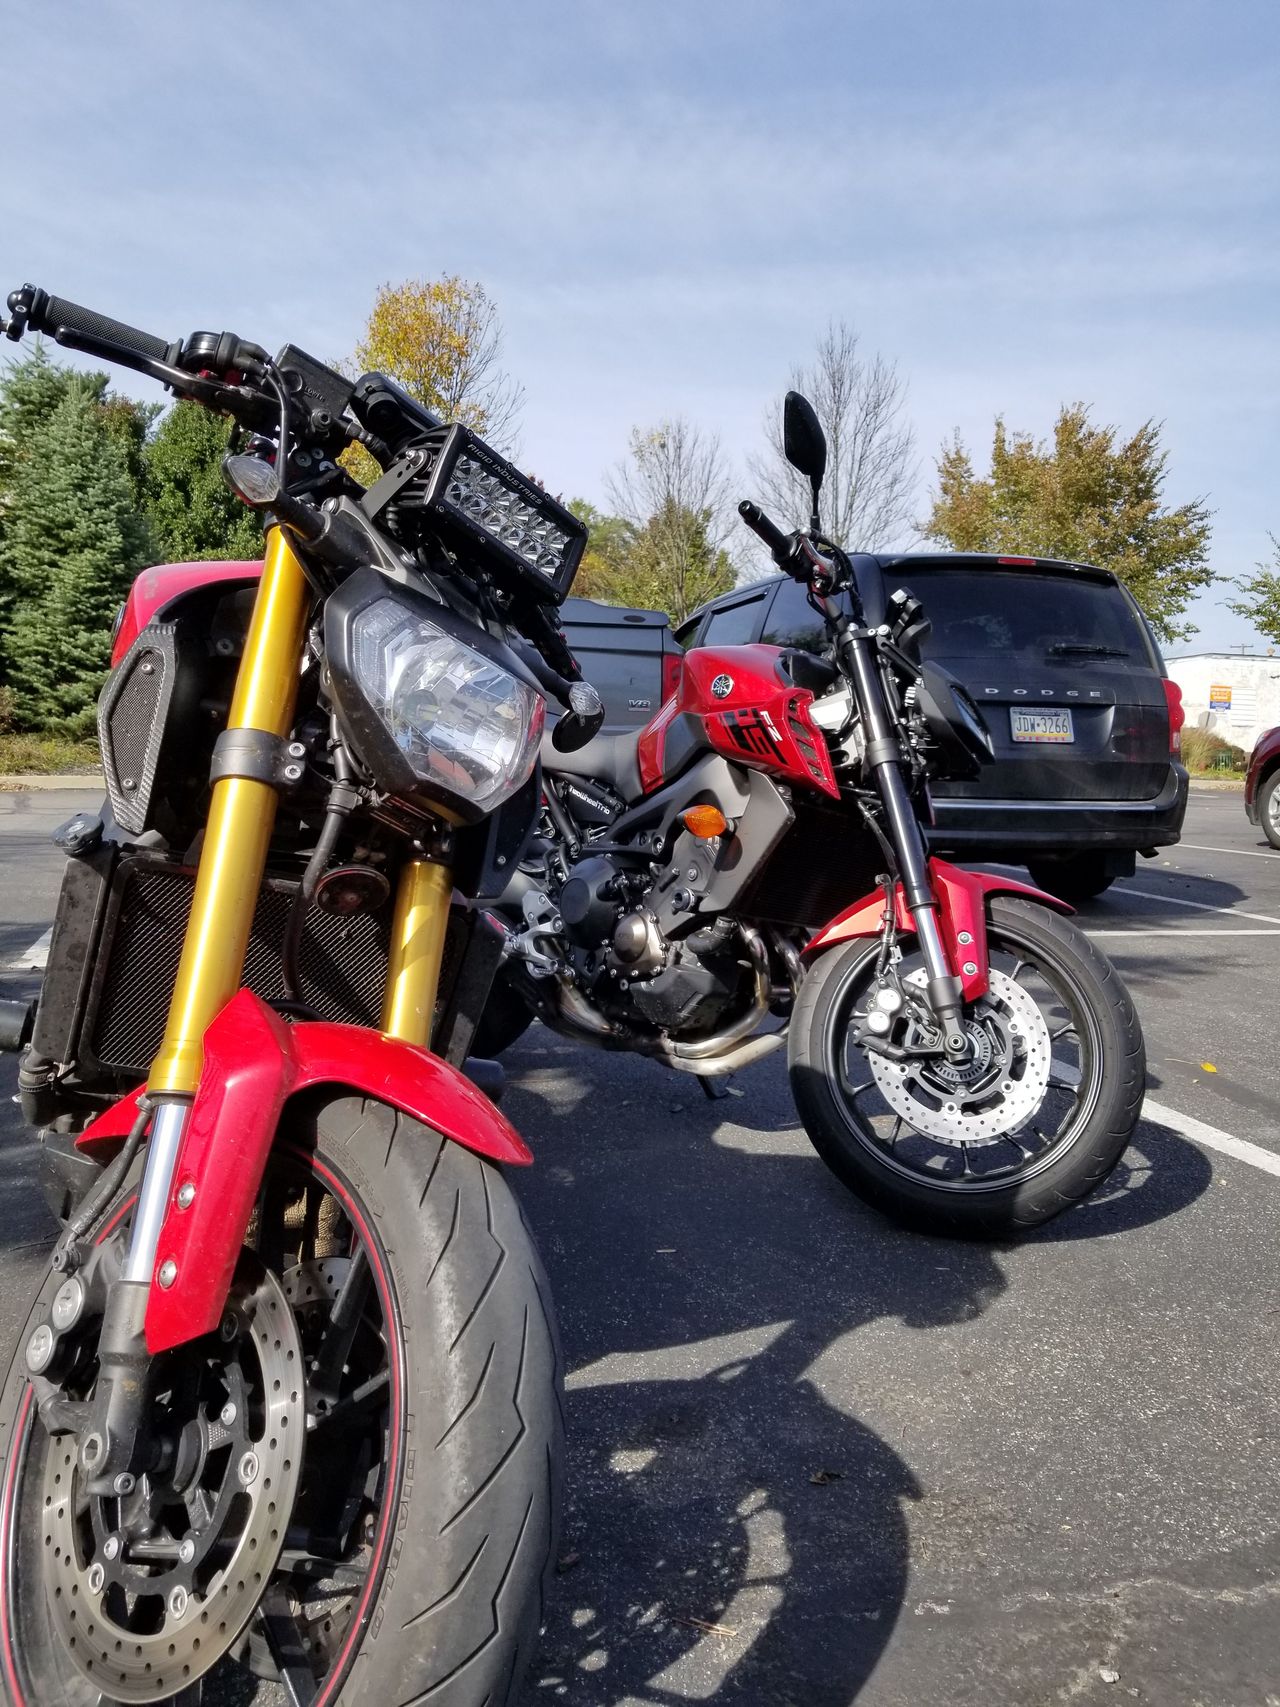 My bike is the one on the right